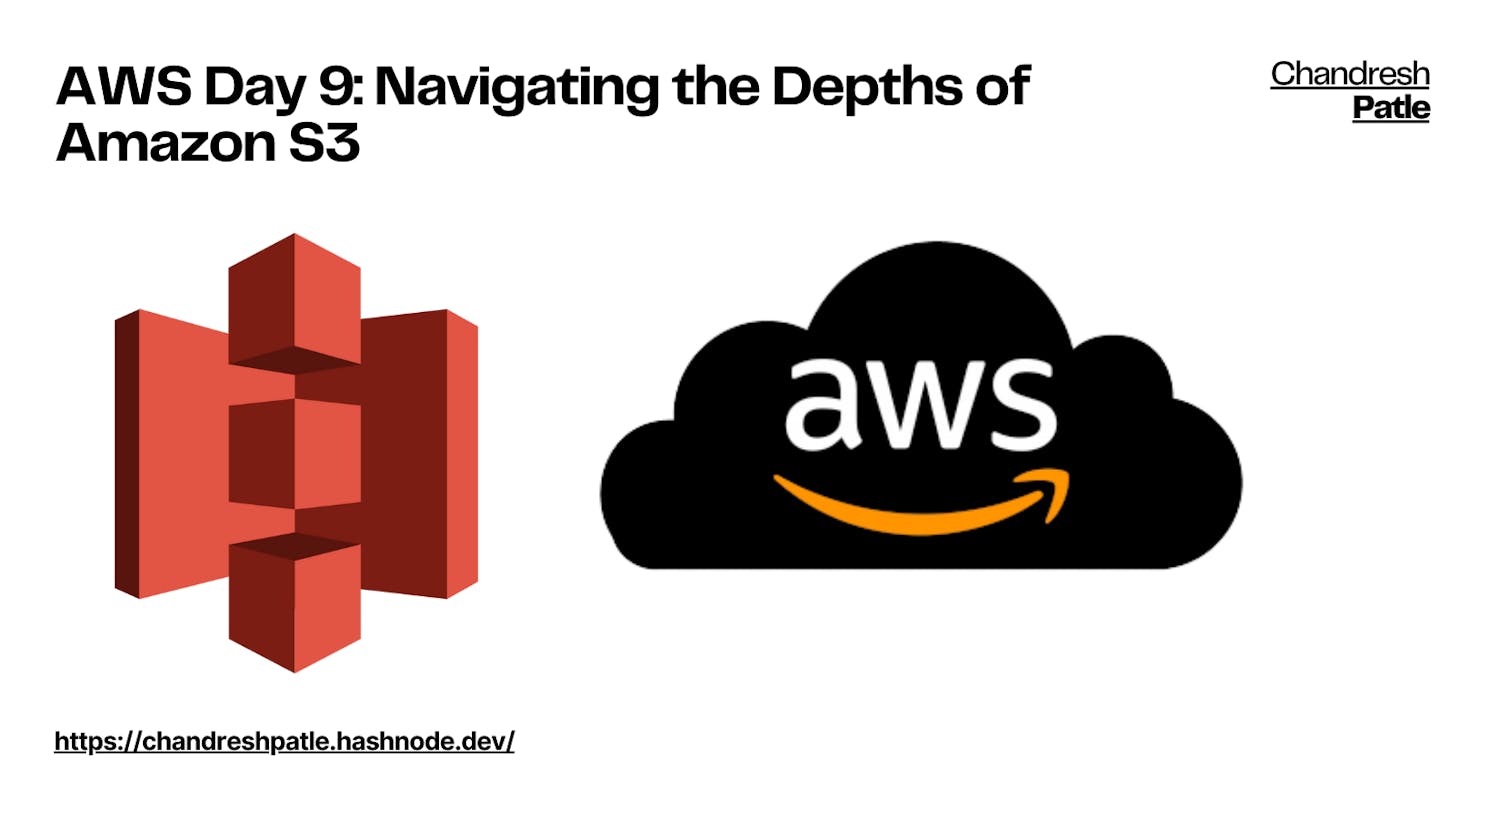 AWS Day 9: Navigating the Depths of Amazon S3